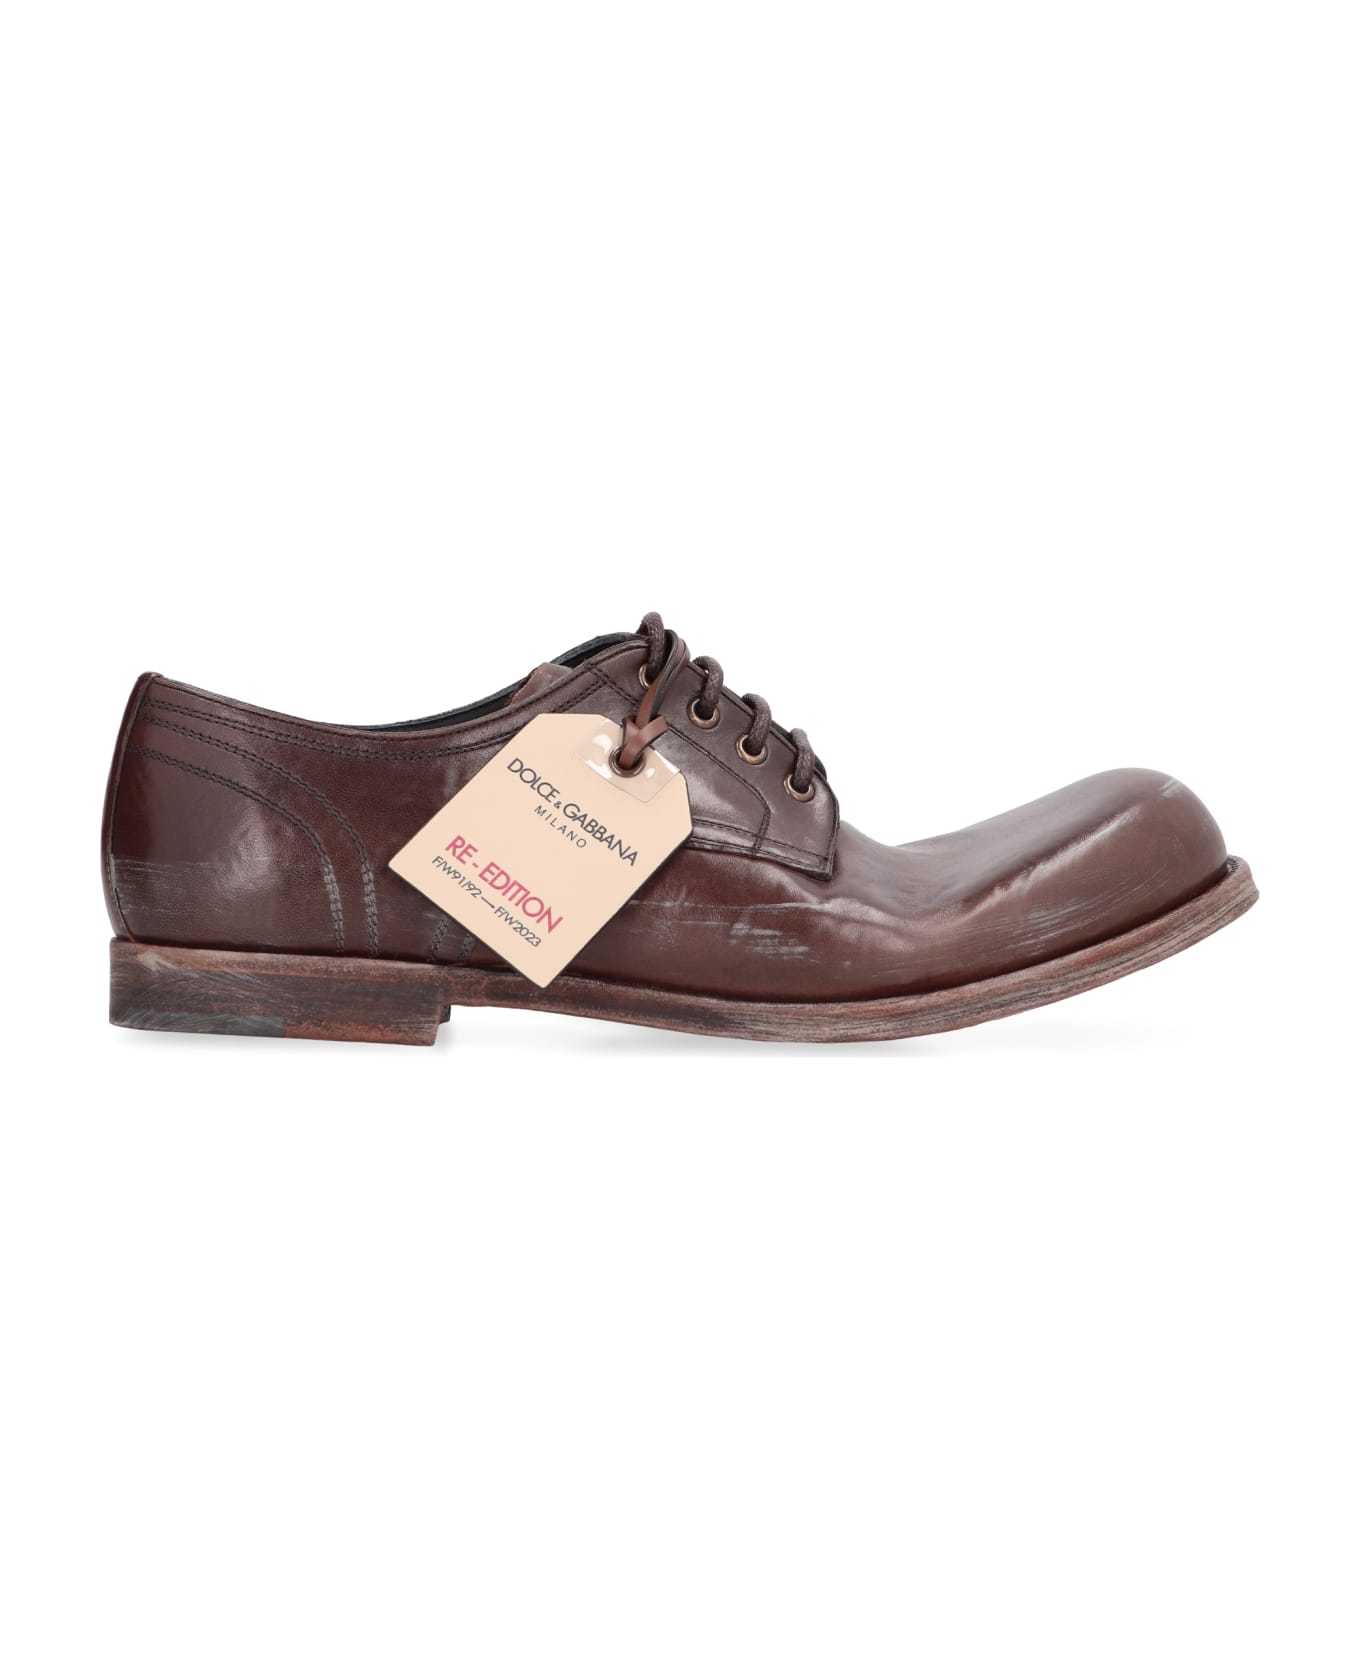 Dolce & Gabbana Leather Lace-up Derby Shoes - Saddle Brown ローファー＆デッキシューズ